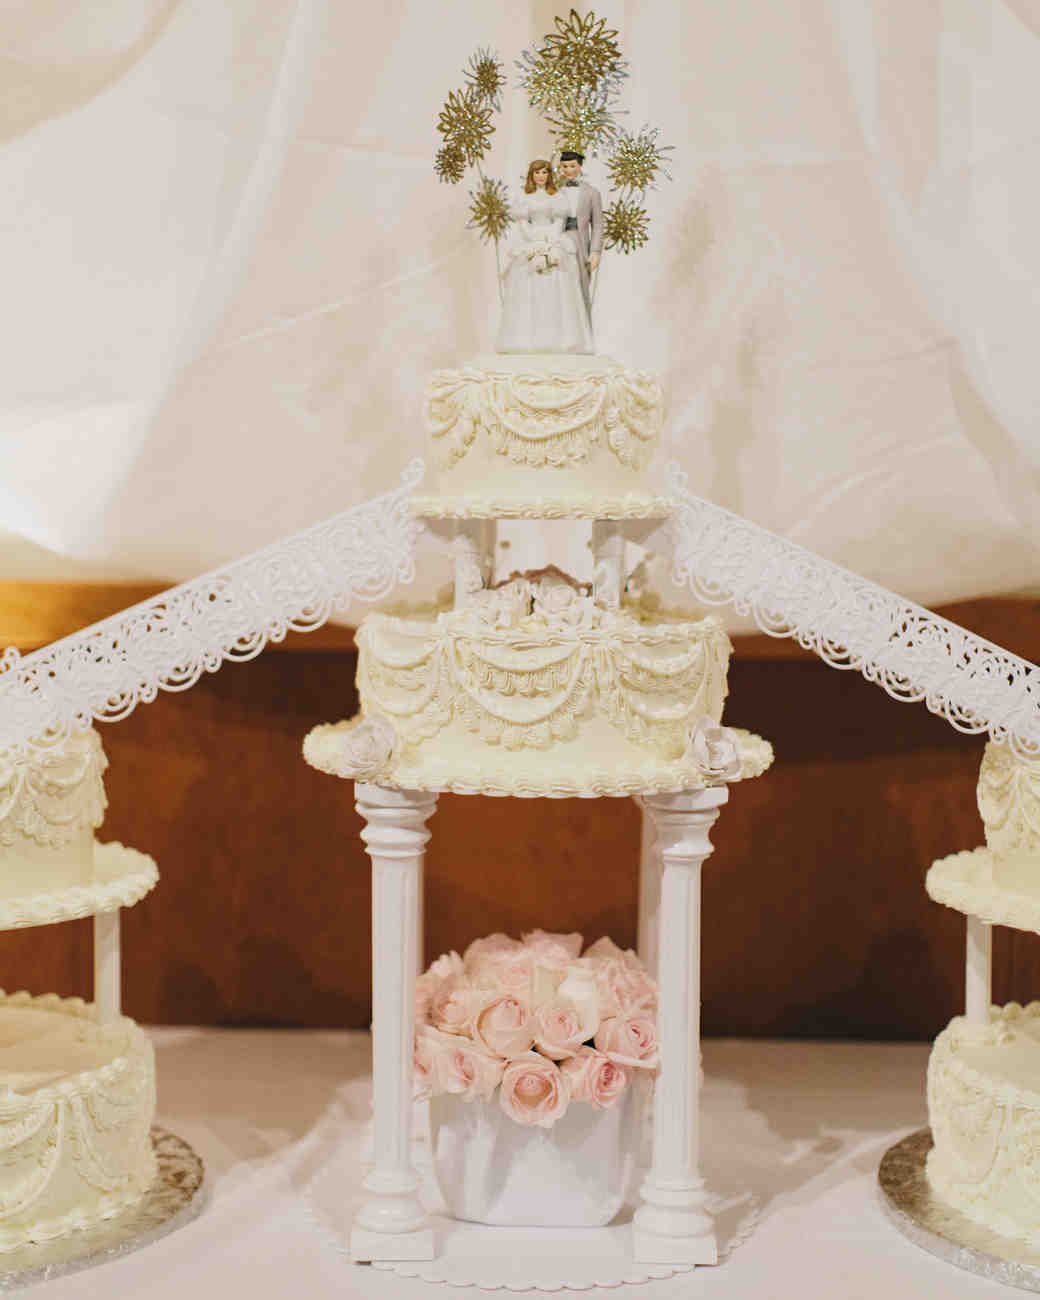 Two tiered elevated wedding cake with large cake toppers